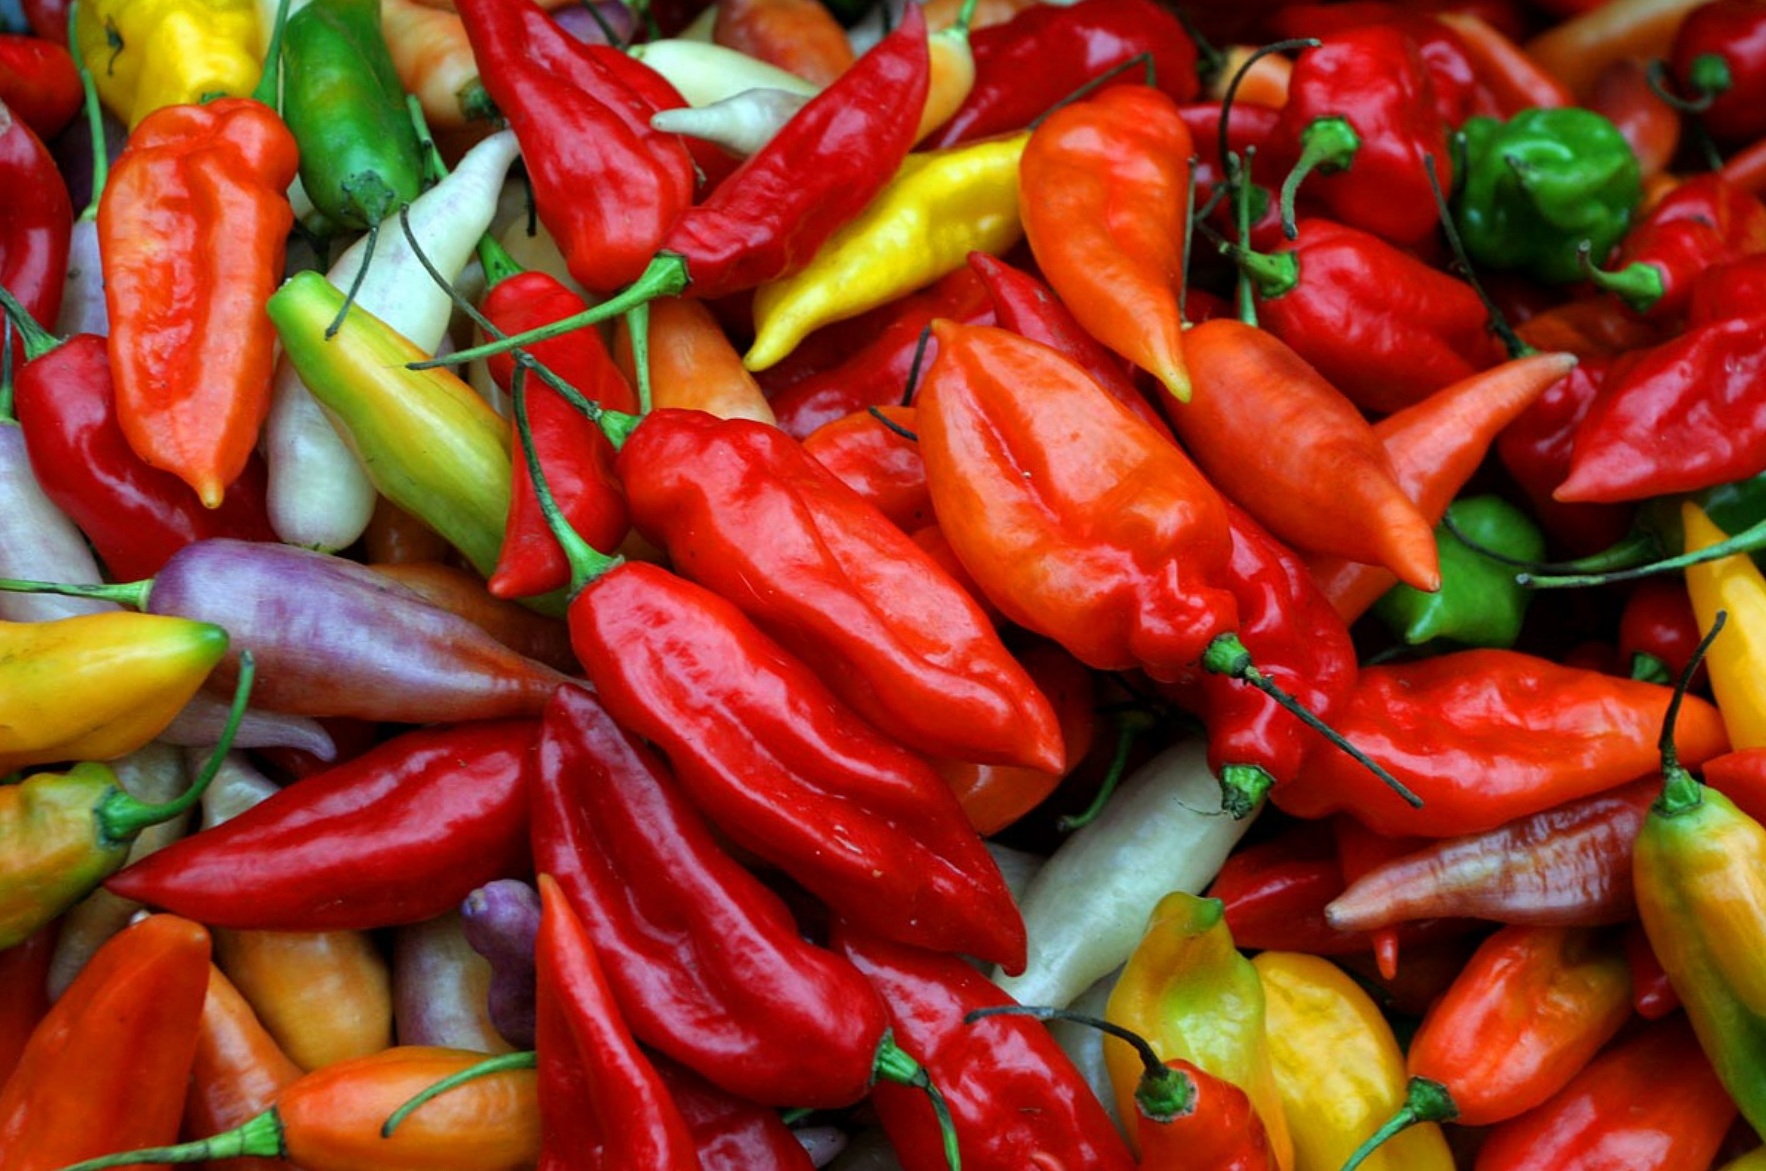 Chili peppers have several types and presentations.